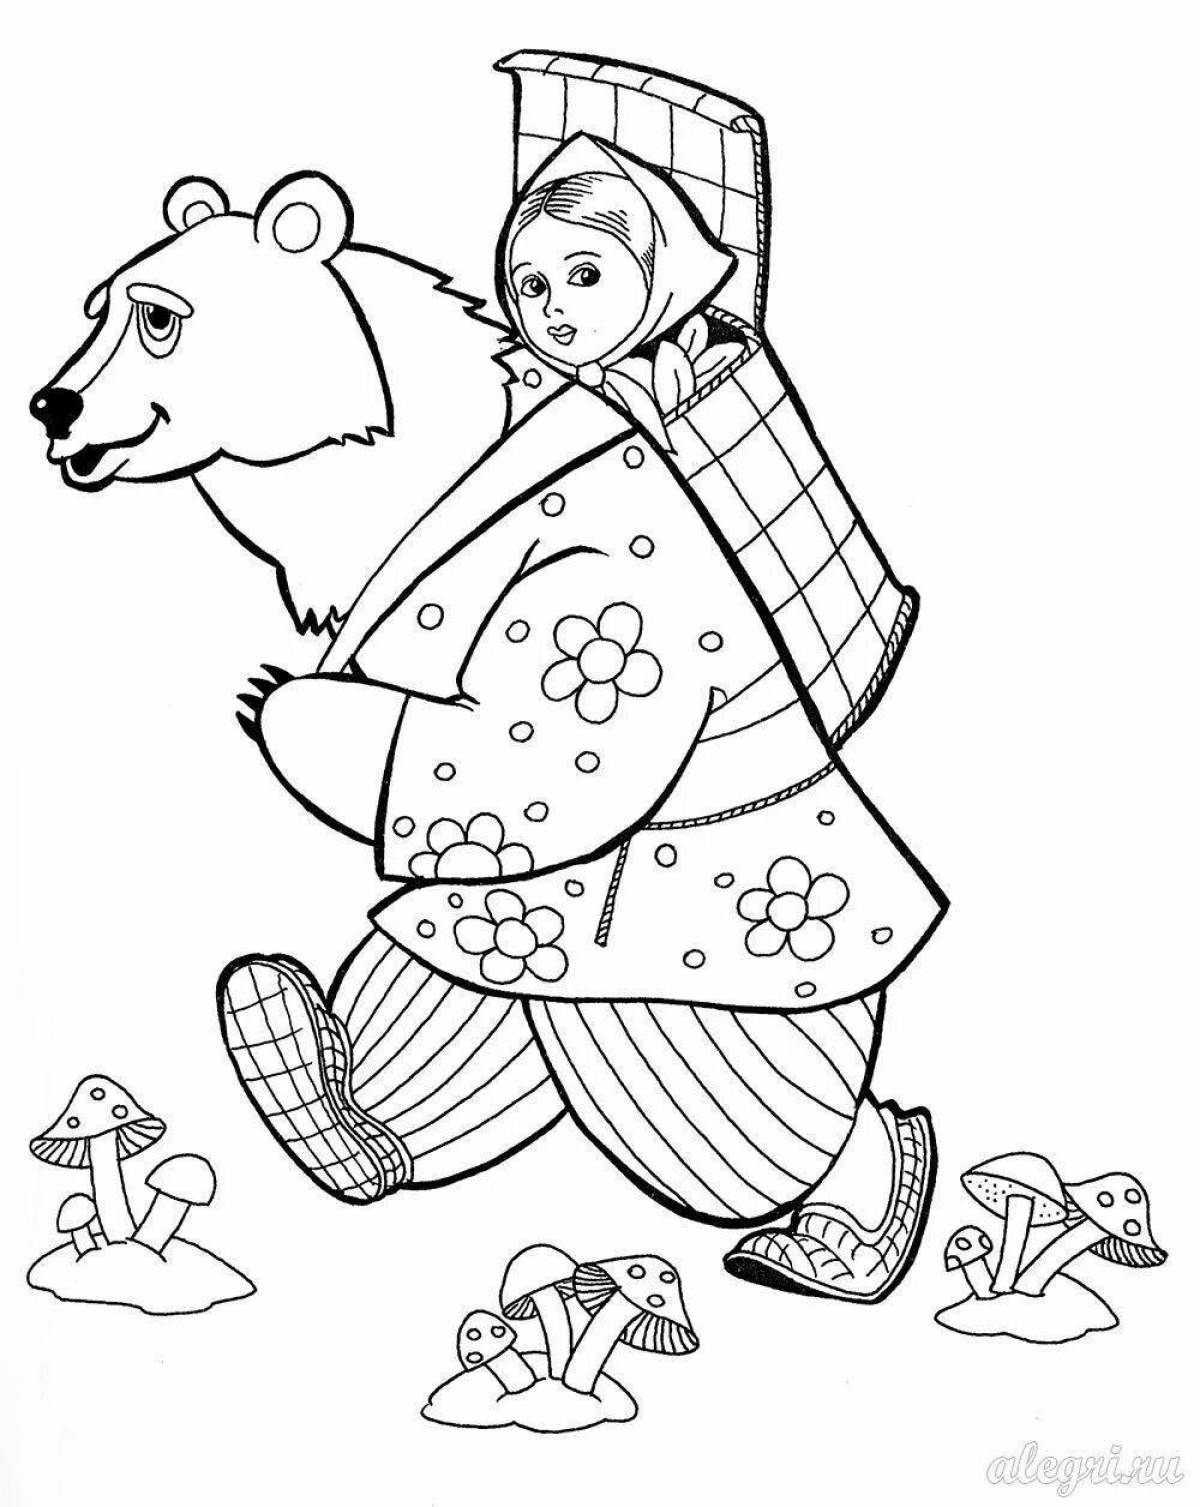 Fantastic fairy tale coloring book for kids